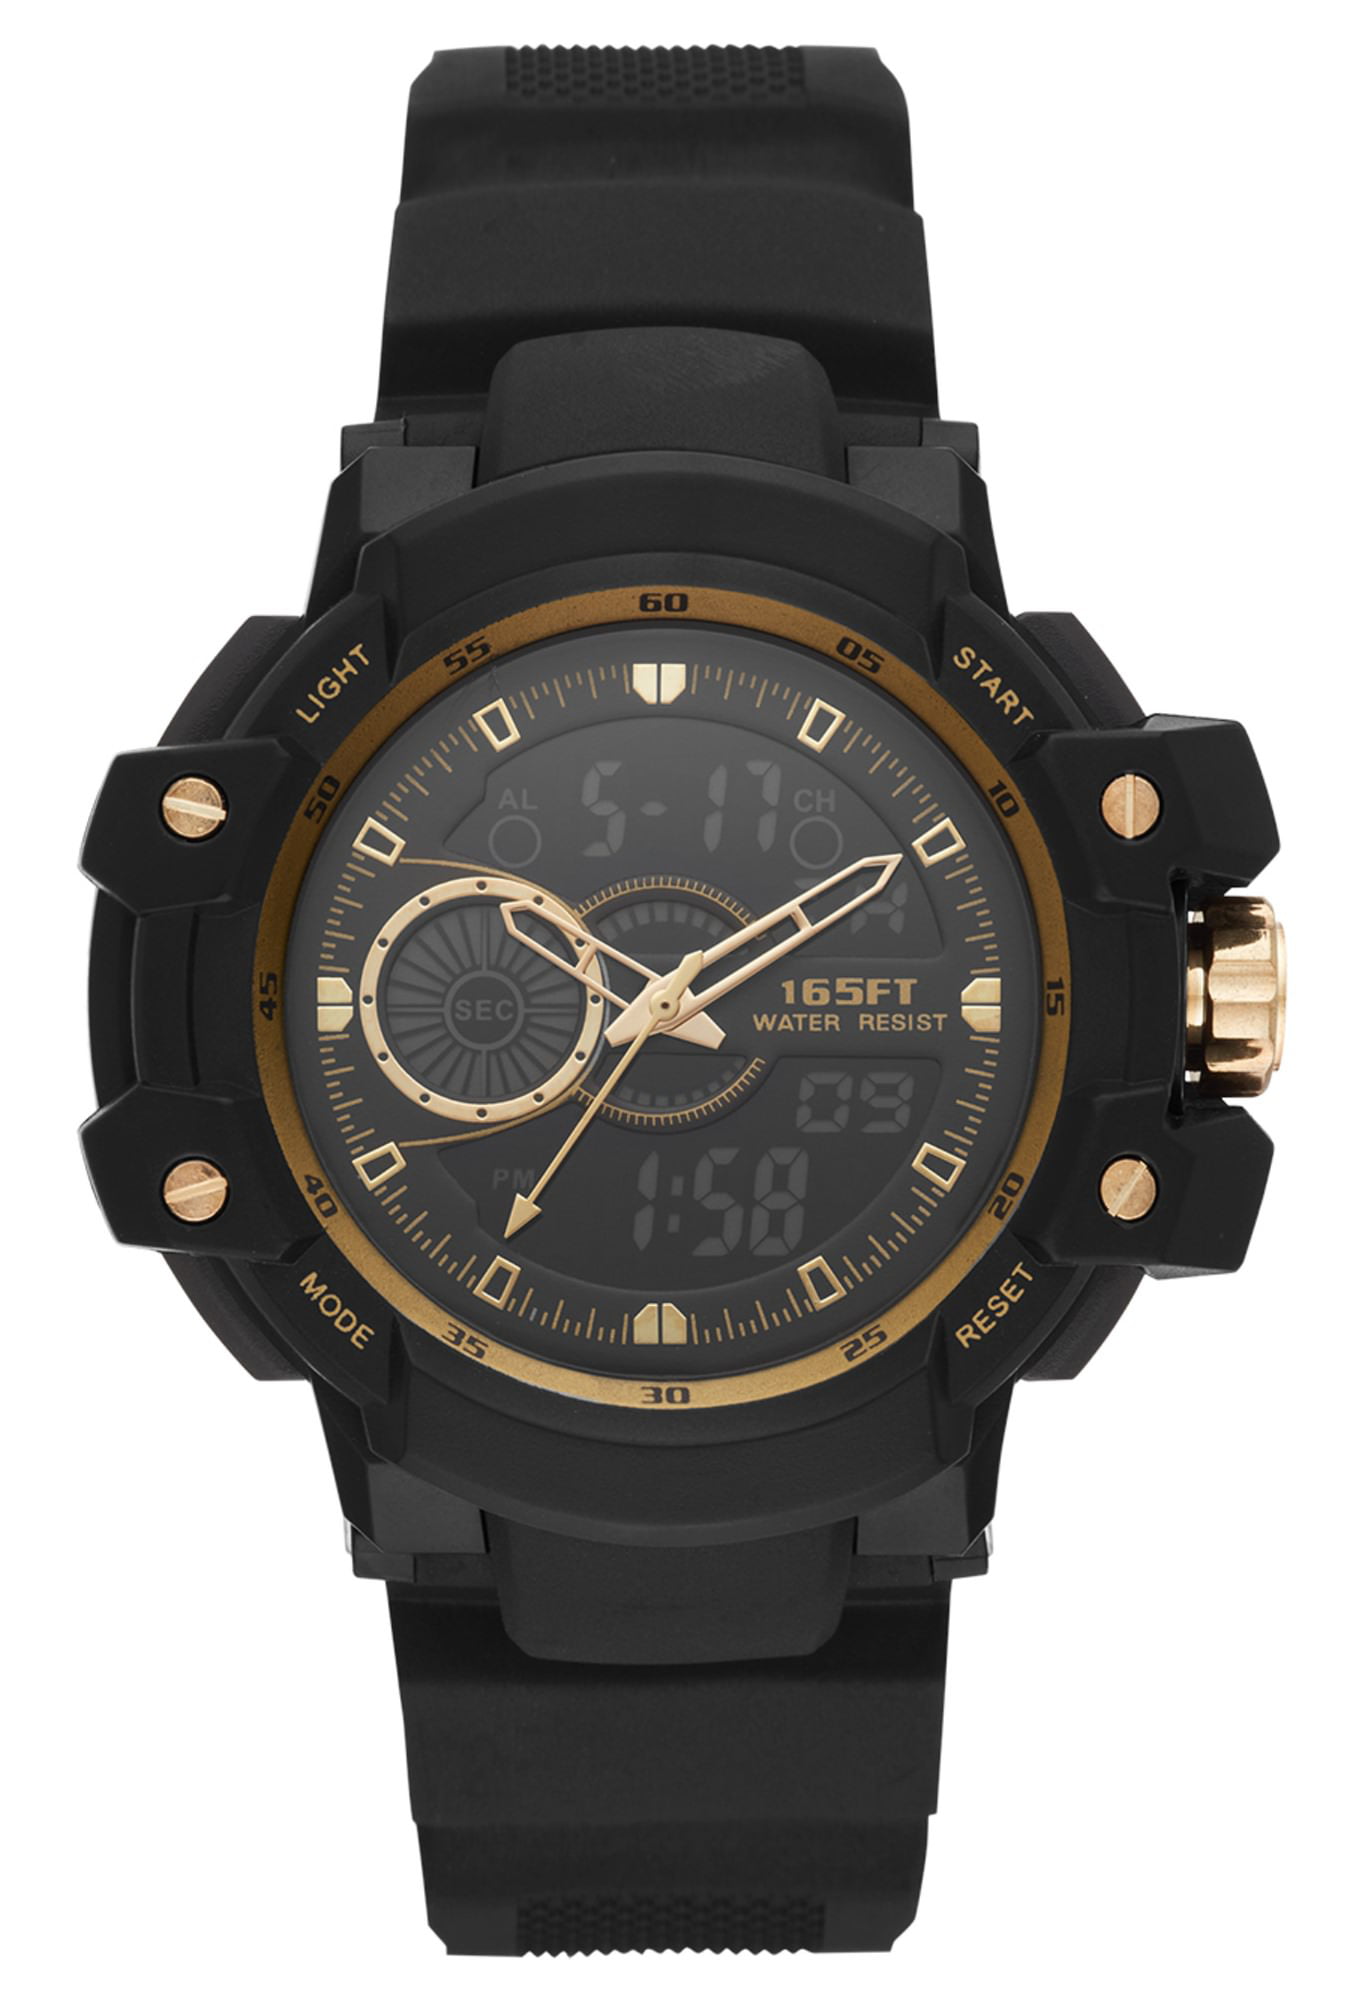 Mens Ana-Digi Sport watch in Black with Gold Accents